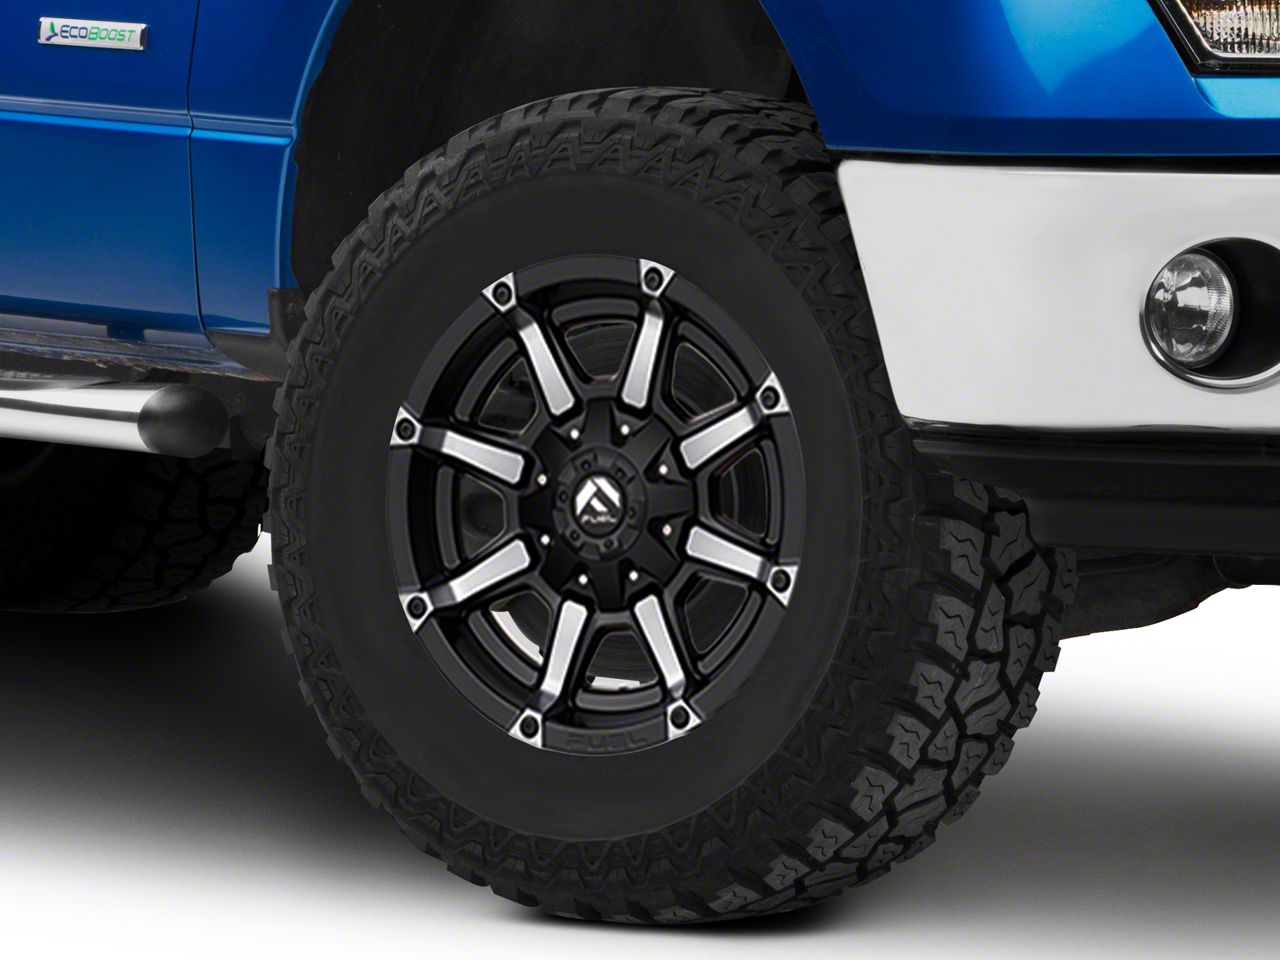 20 x 10. inches /8 x 6 inches, -18 mm Offset Fuel Triton black Wheel with Painted Finish 